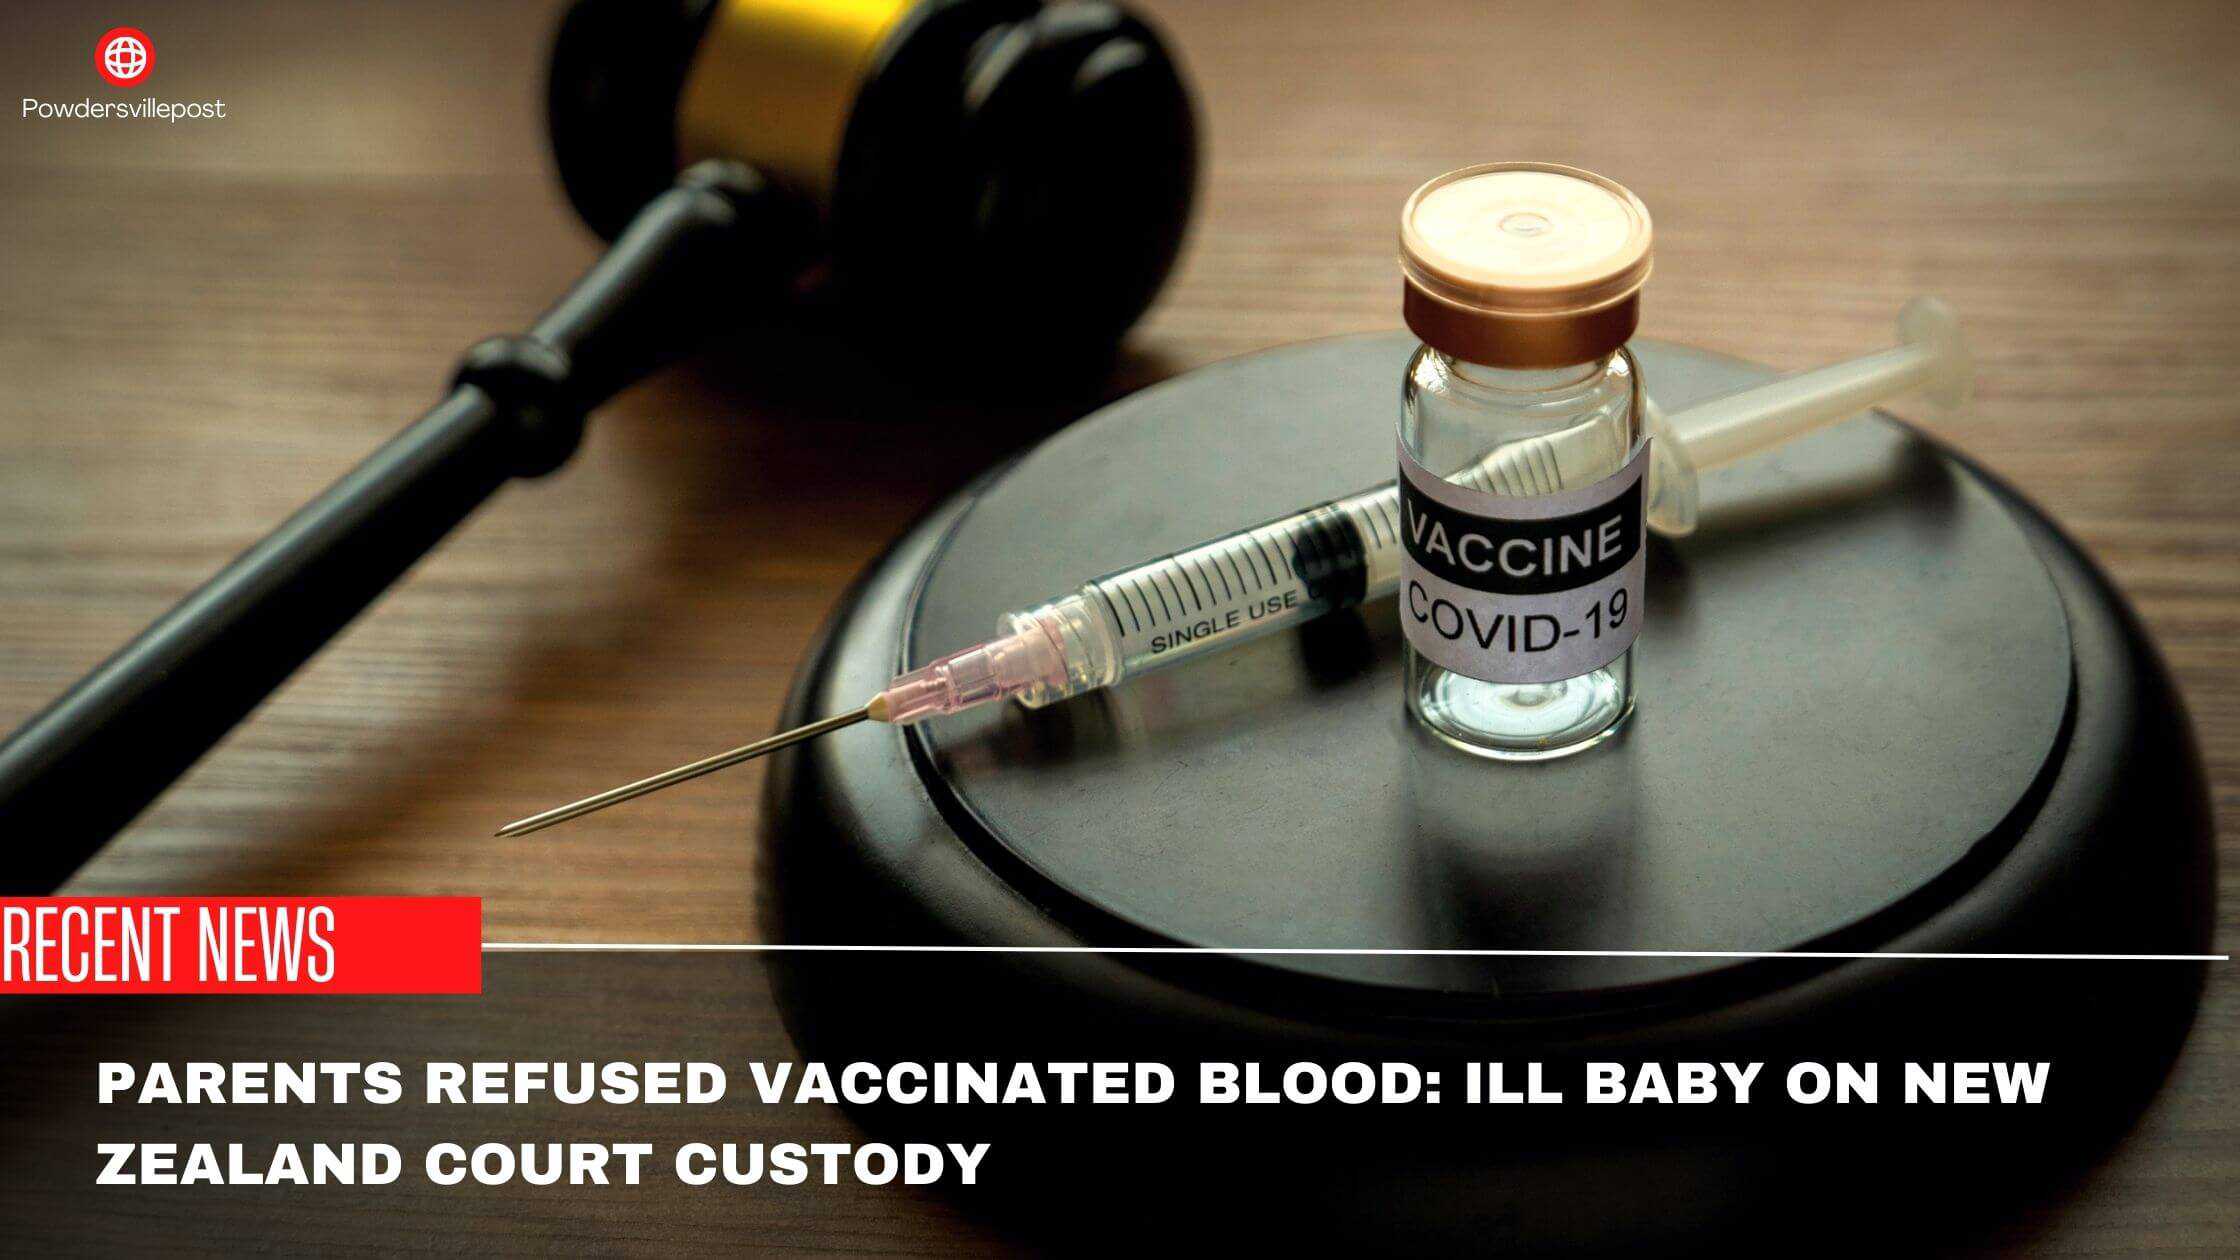 Parents Refused Vaccinated Blood Ill Baby On New Zealand Court Custody